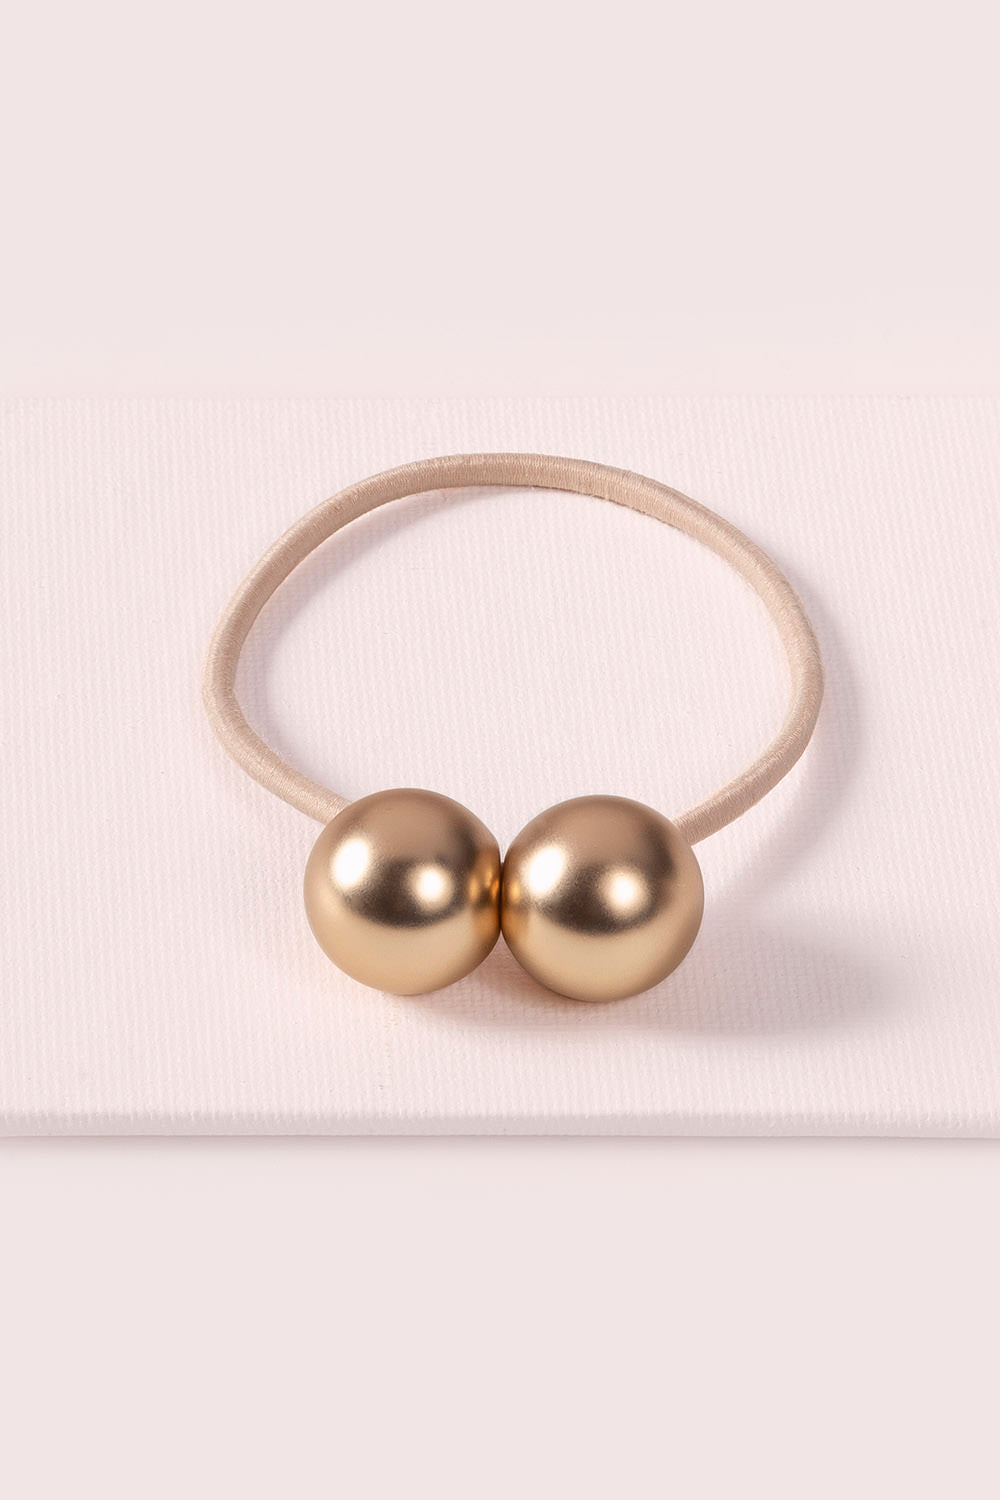 The Hair Edit Soft Gold Orb Duo Ponytail Holder Dual-Sphere Metal Hair Tie Accessory